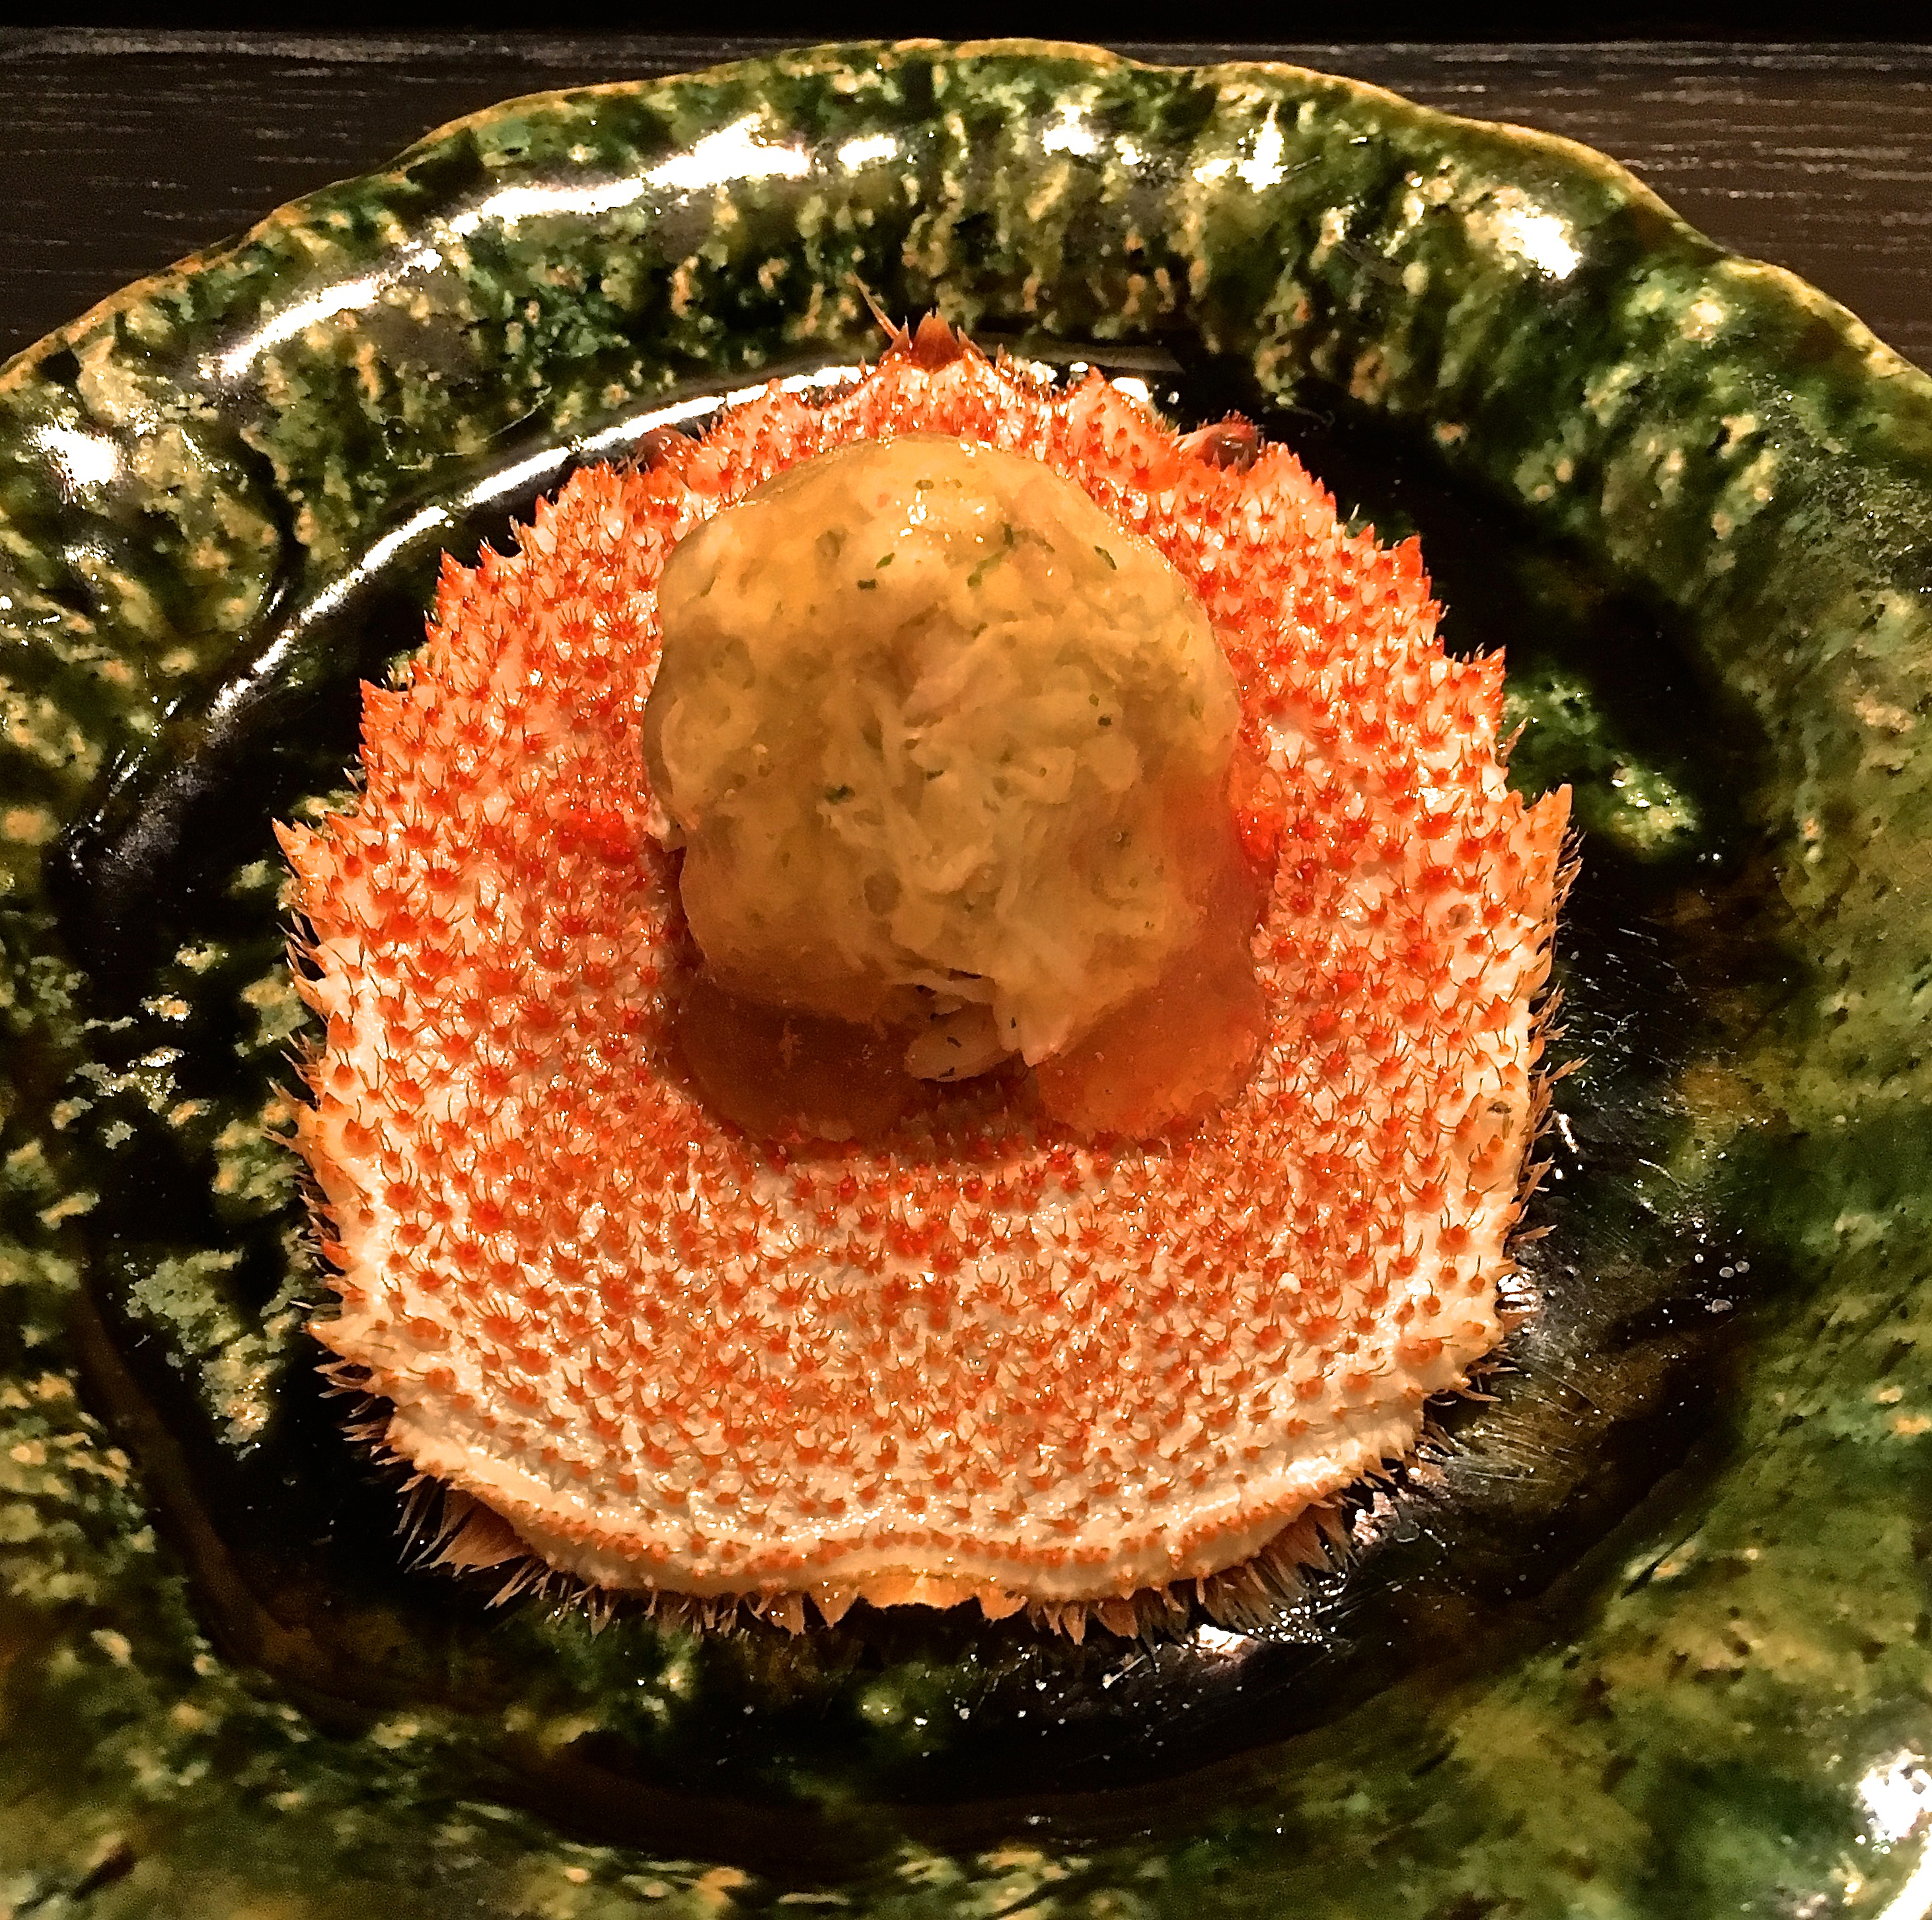 Layered crustacean: One of the highlights was kegani (horsehair crab) meat glazed with yuzu (Japanese citrus) jelly and served on its carapace. | ROBBIE SWINNERTON